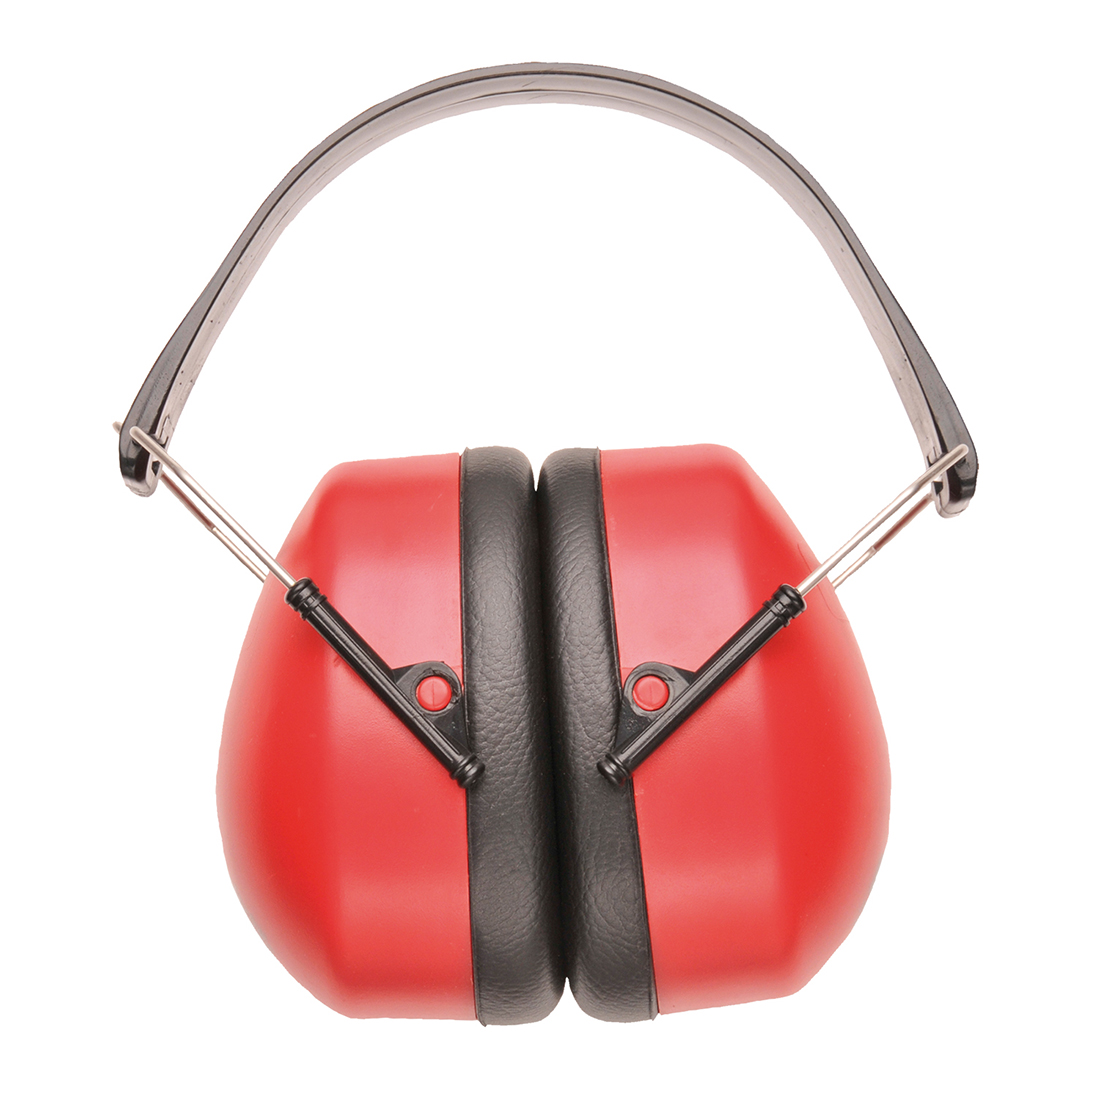 Hearing Protection, Ear Muffs